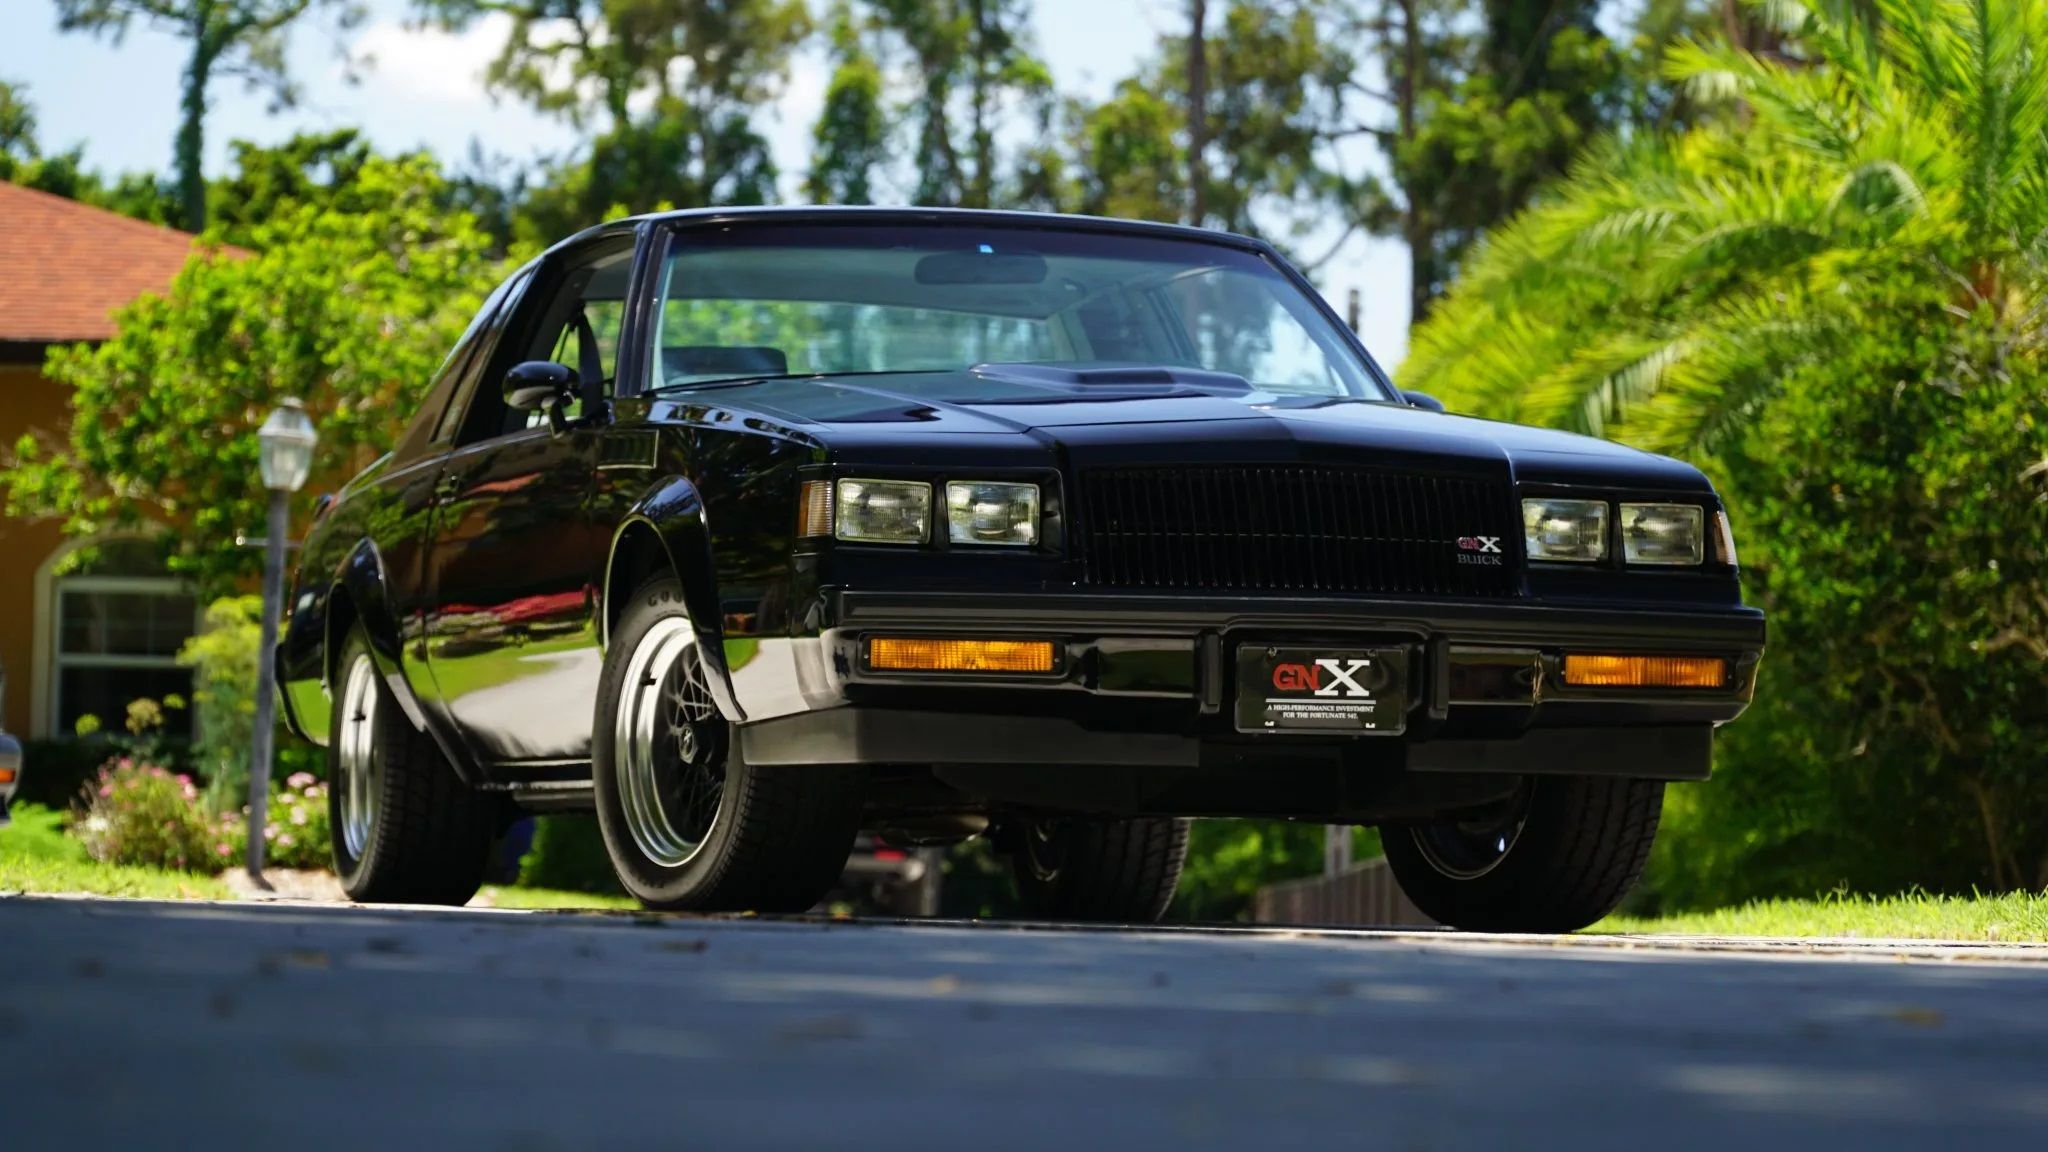 The 1987 Buick GNX for sale on Bring a Trailer.